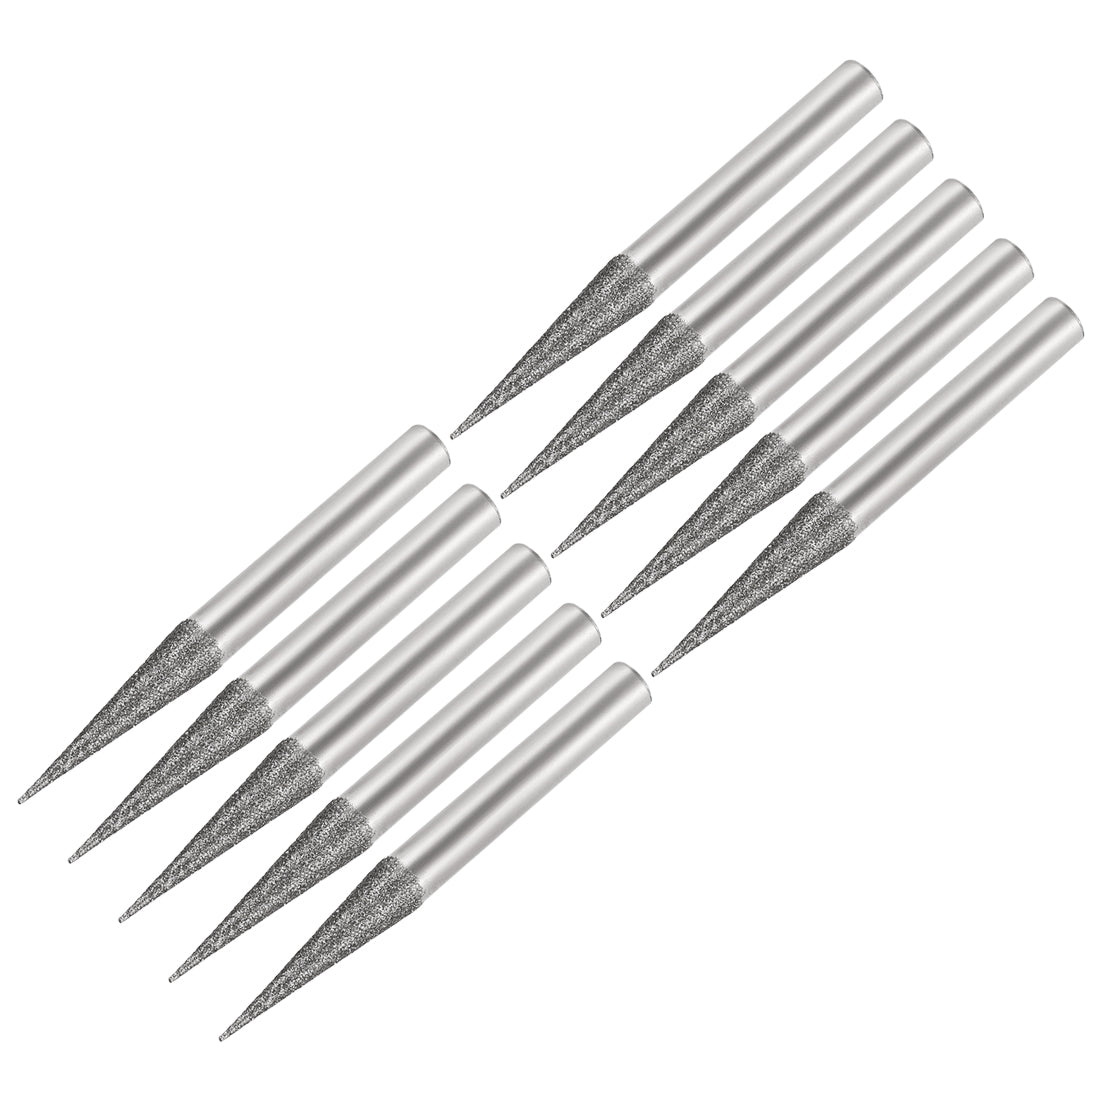 uxcell Uxcell Diamond Burrs Grinding Drill Bits for Carving Rotary Tool 1/4-Inch Shank 6mm Pointed 150 Grit 10 Pcs